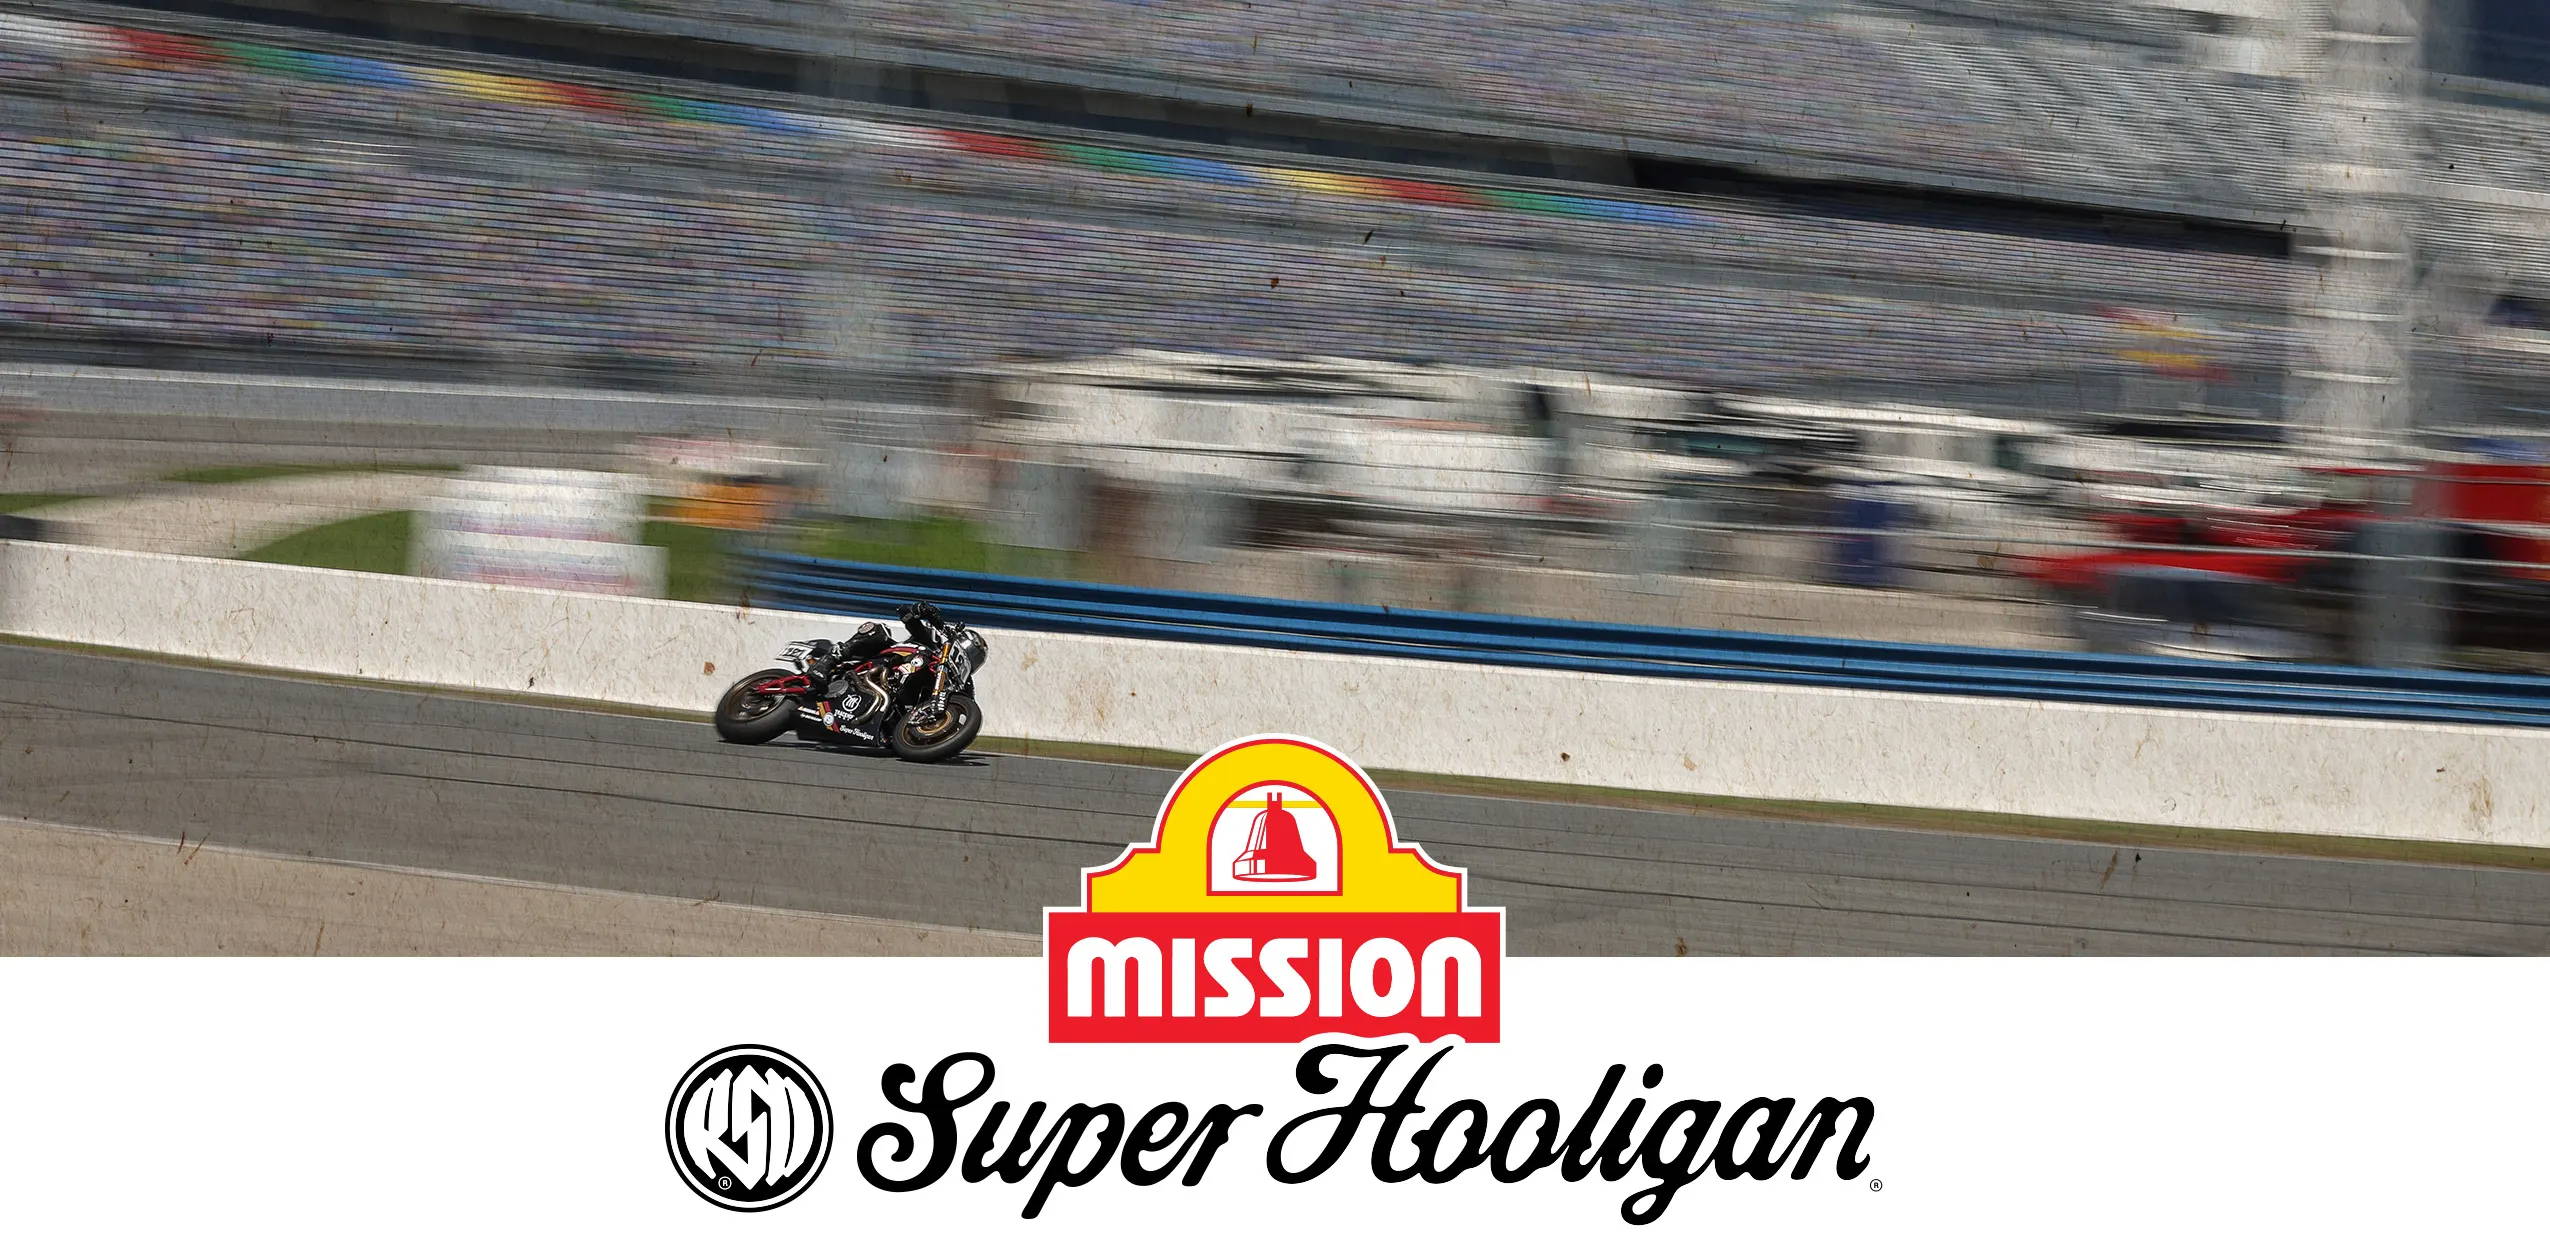 A motorcycle racer speeds along the high banks of Daytona International Speedway in the Super Hooligan race, captured in front of a colorful, blurred crowd in the grandstands. Prominent overlays include the Mission Super Hooligan logo, highlighting the high-octane excitement of the event.